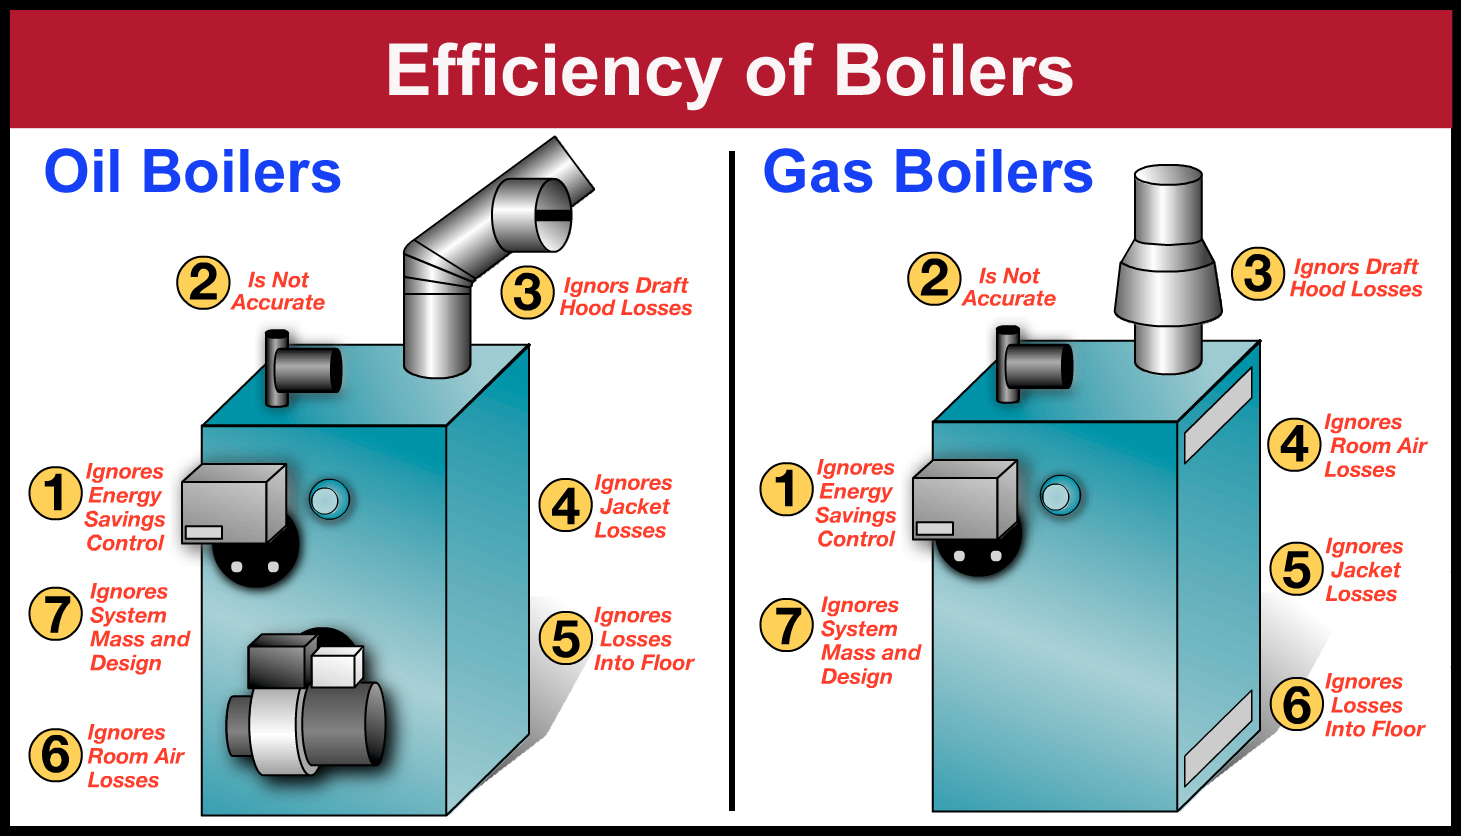 centerpoint-energy-home-service-plus-boiler-tune-up